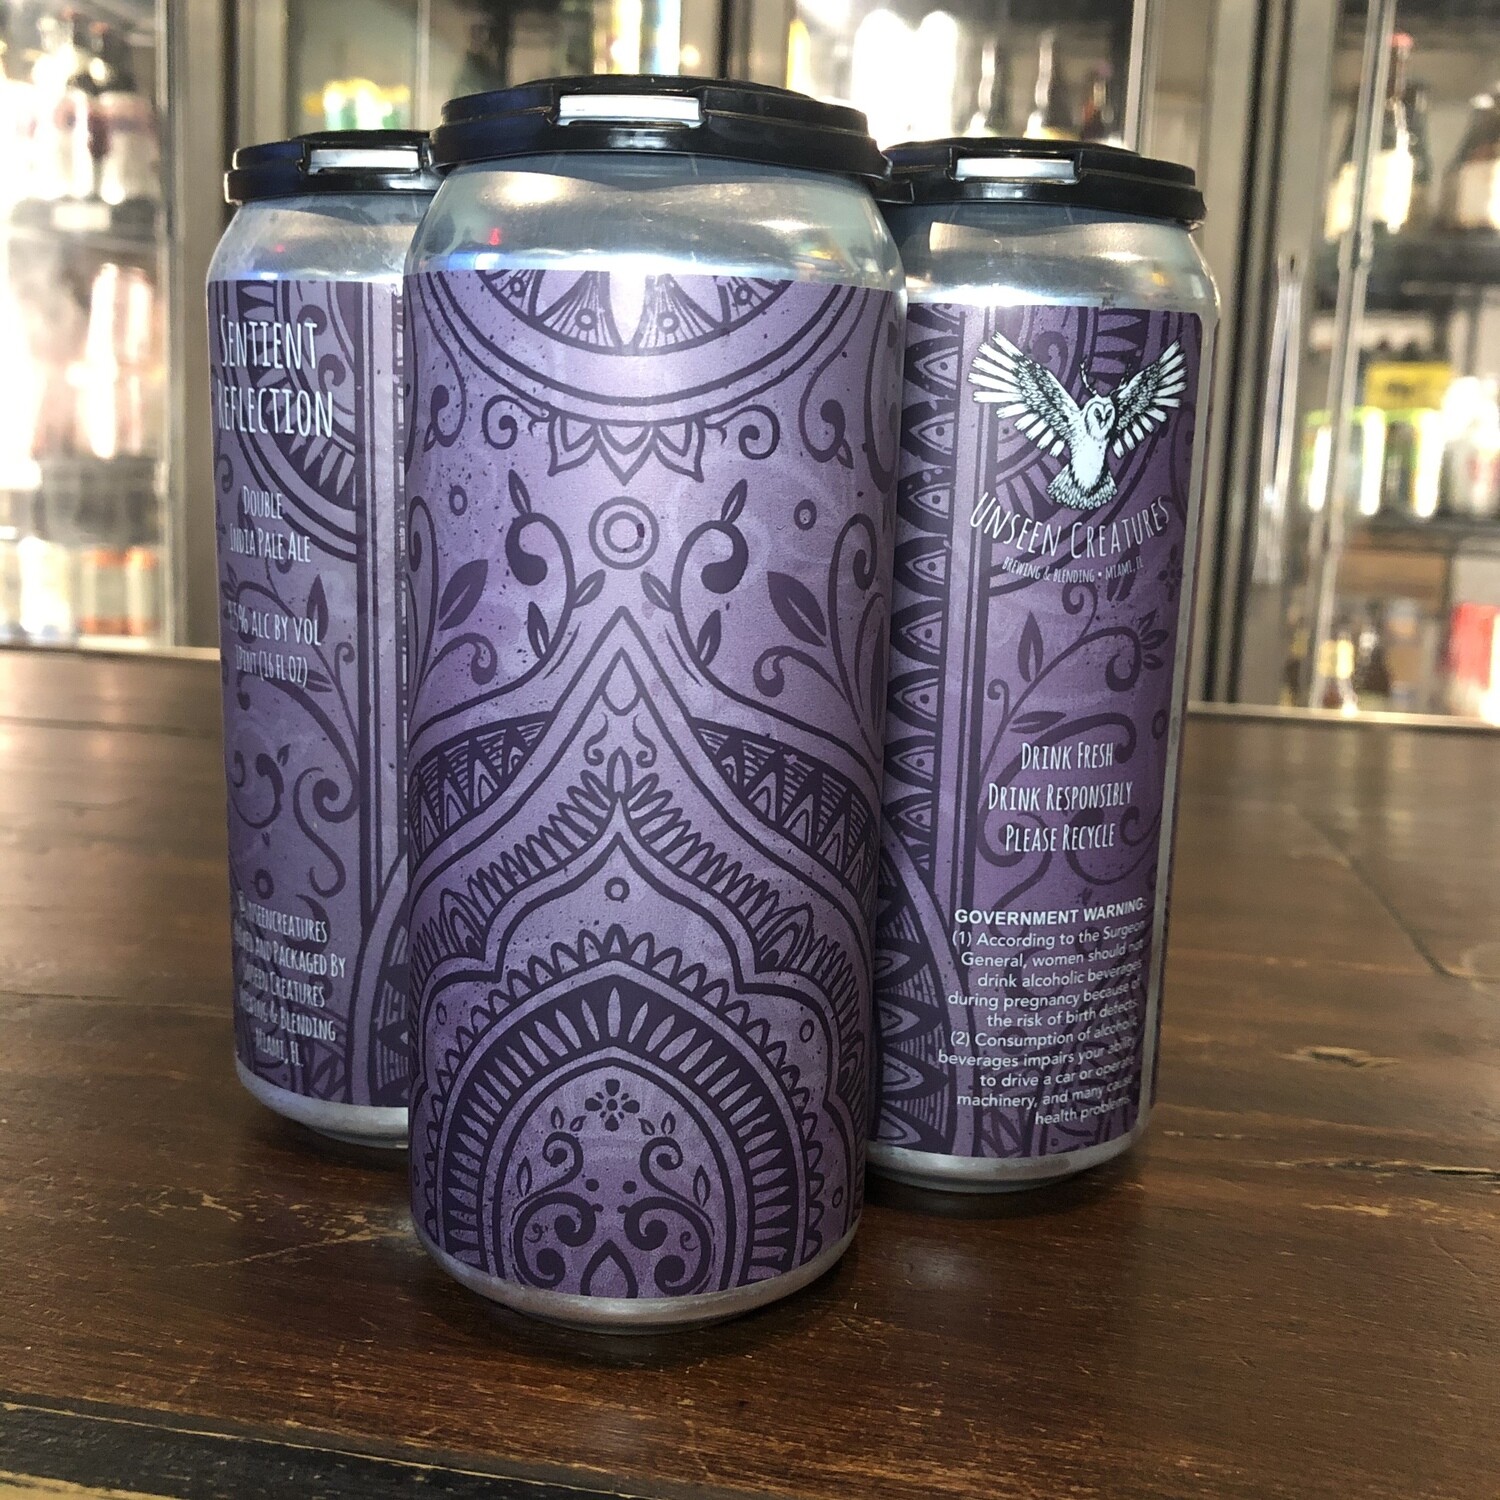 Unseen Creatures - Sentient Reflection West Coast Inspired DIPA - (4-pack)